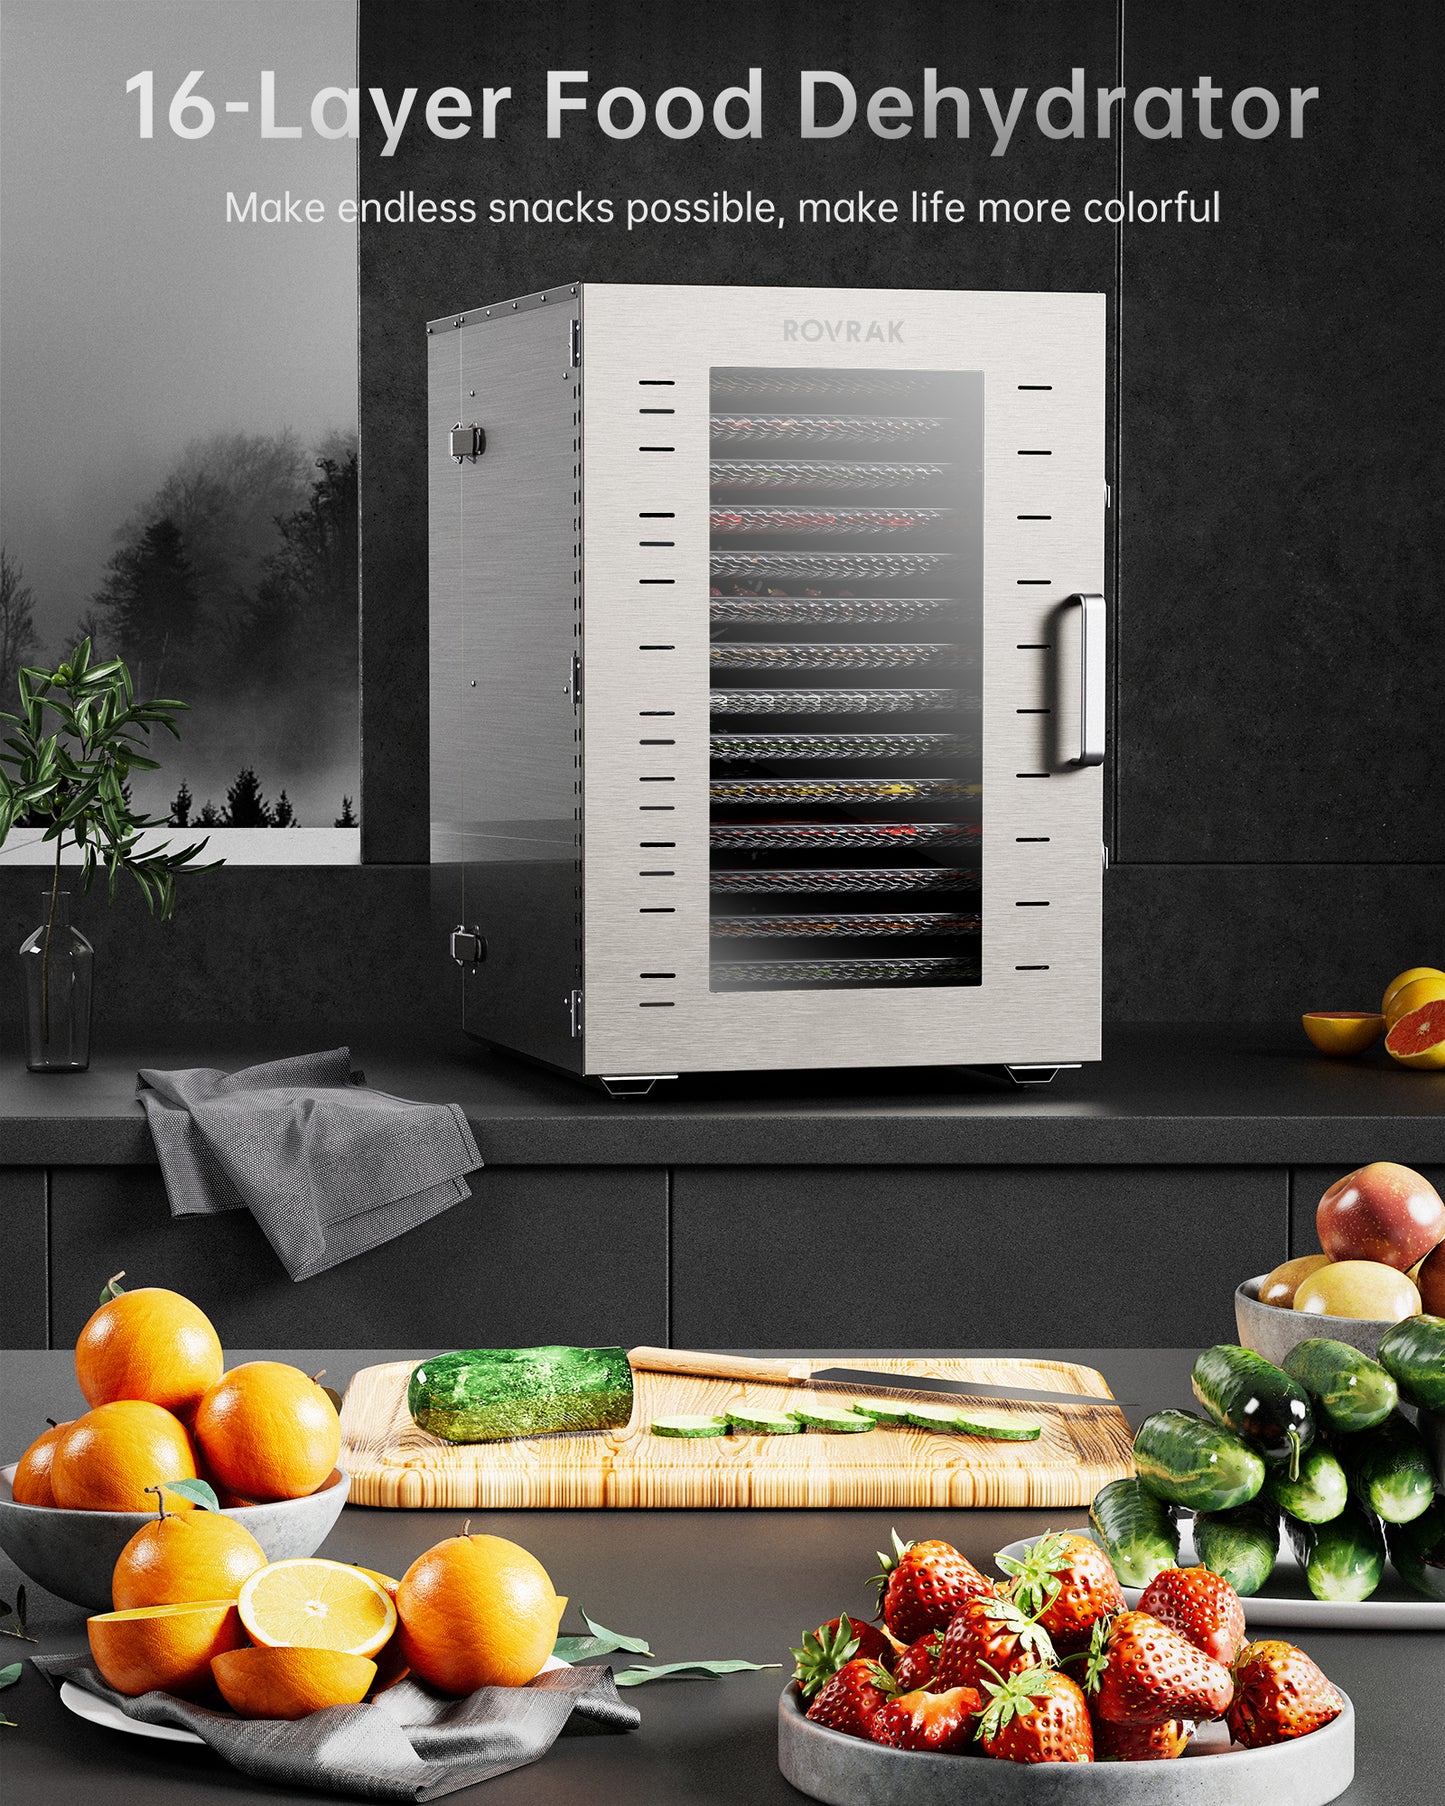 ROVRAk Commercial Dehydrator Machine, 16-Tray Food Dehydrator for Jerky, Fruit, Meat, Herbs, Adjustable Timer, Temperature Control, Overheat Protection (67 Recipes)